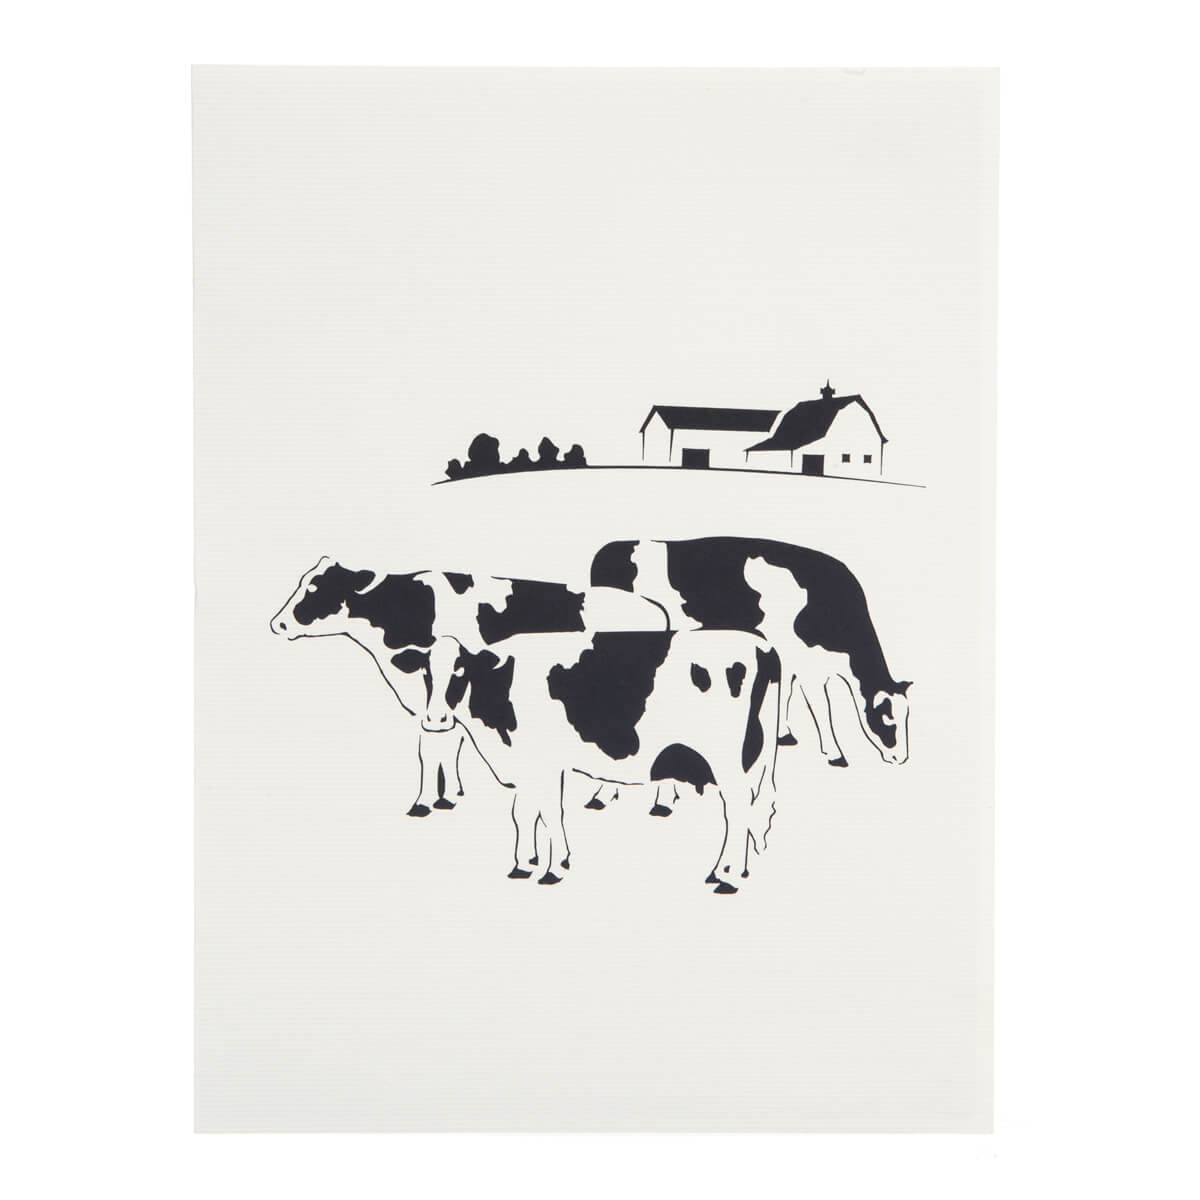 close up image of Friesian Cows Pop Up Card featuring 4 3D cows standing next to each other grazing